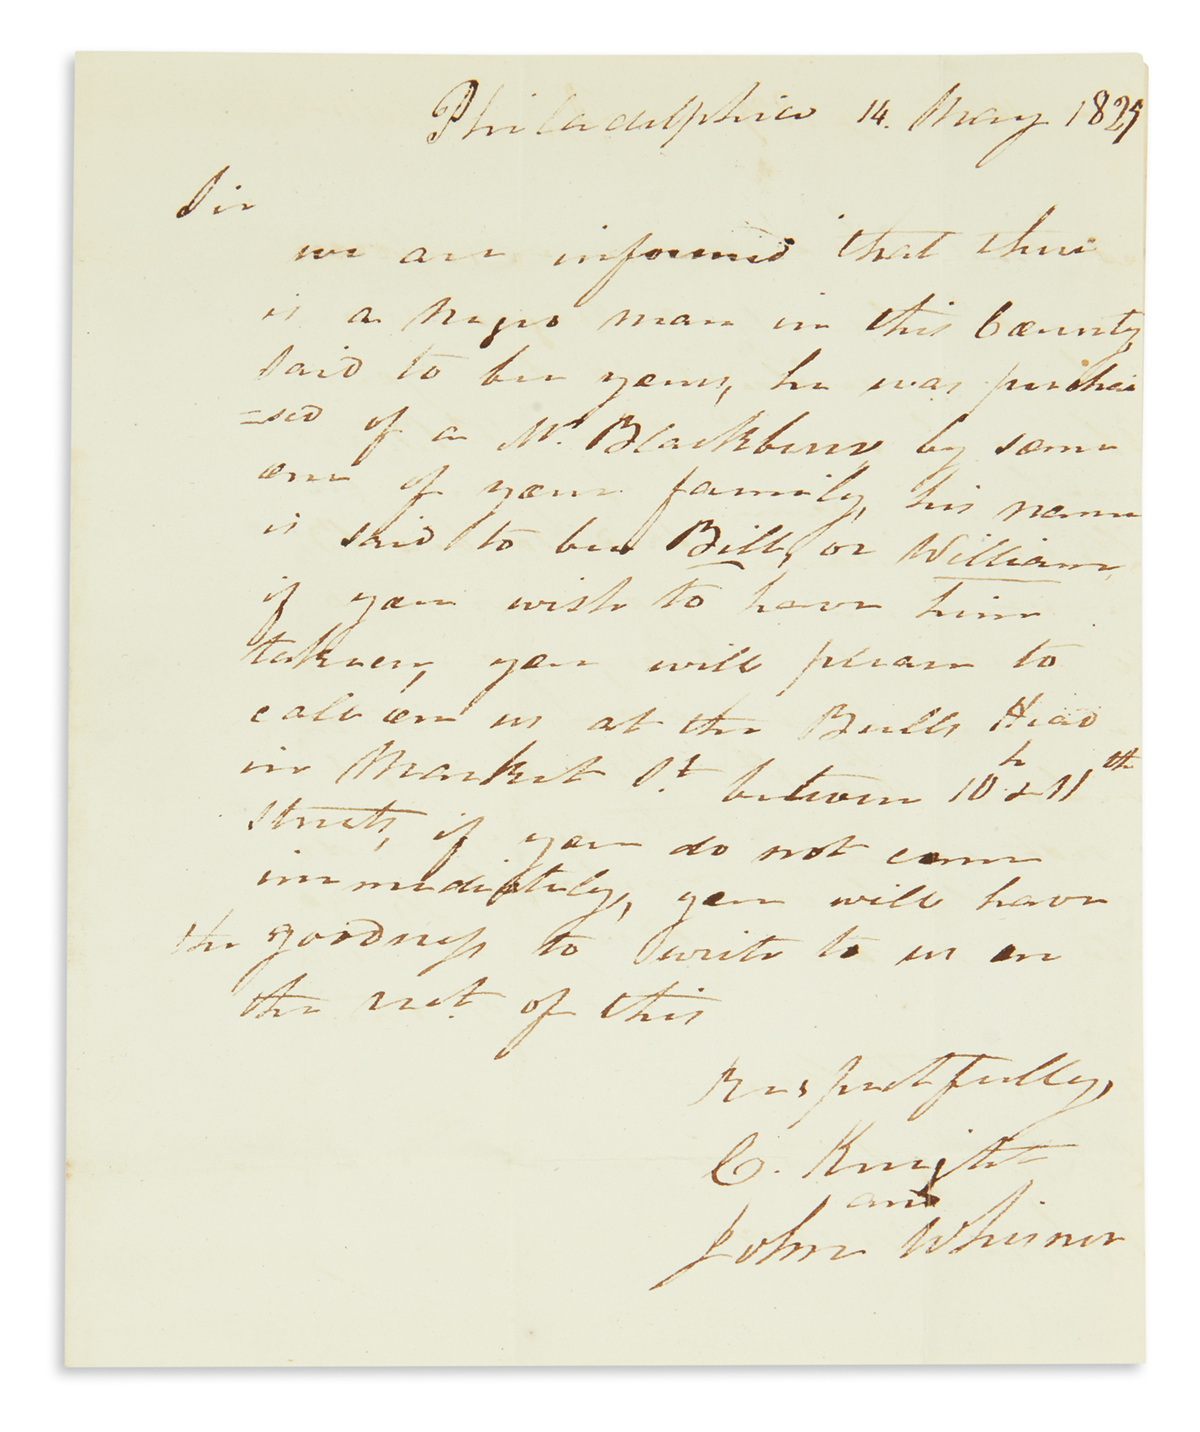 (SLAVERY AND ABOLITION.) Slave documents from the Hooe family, including letters on runaways.